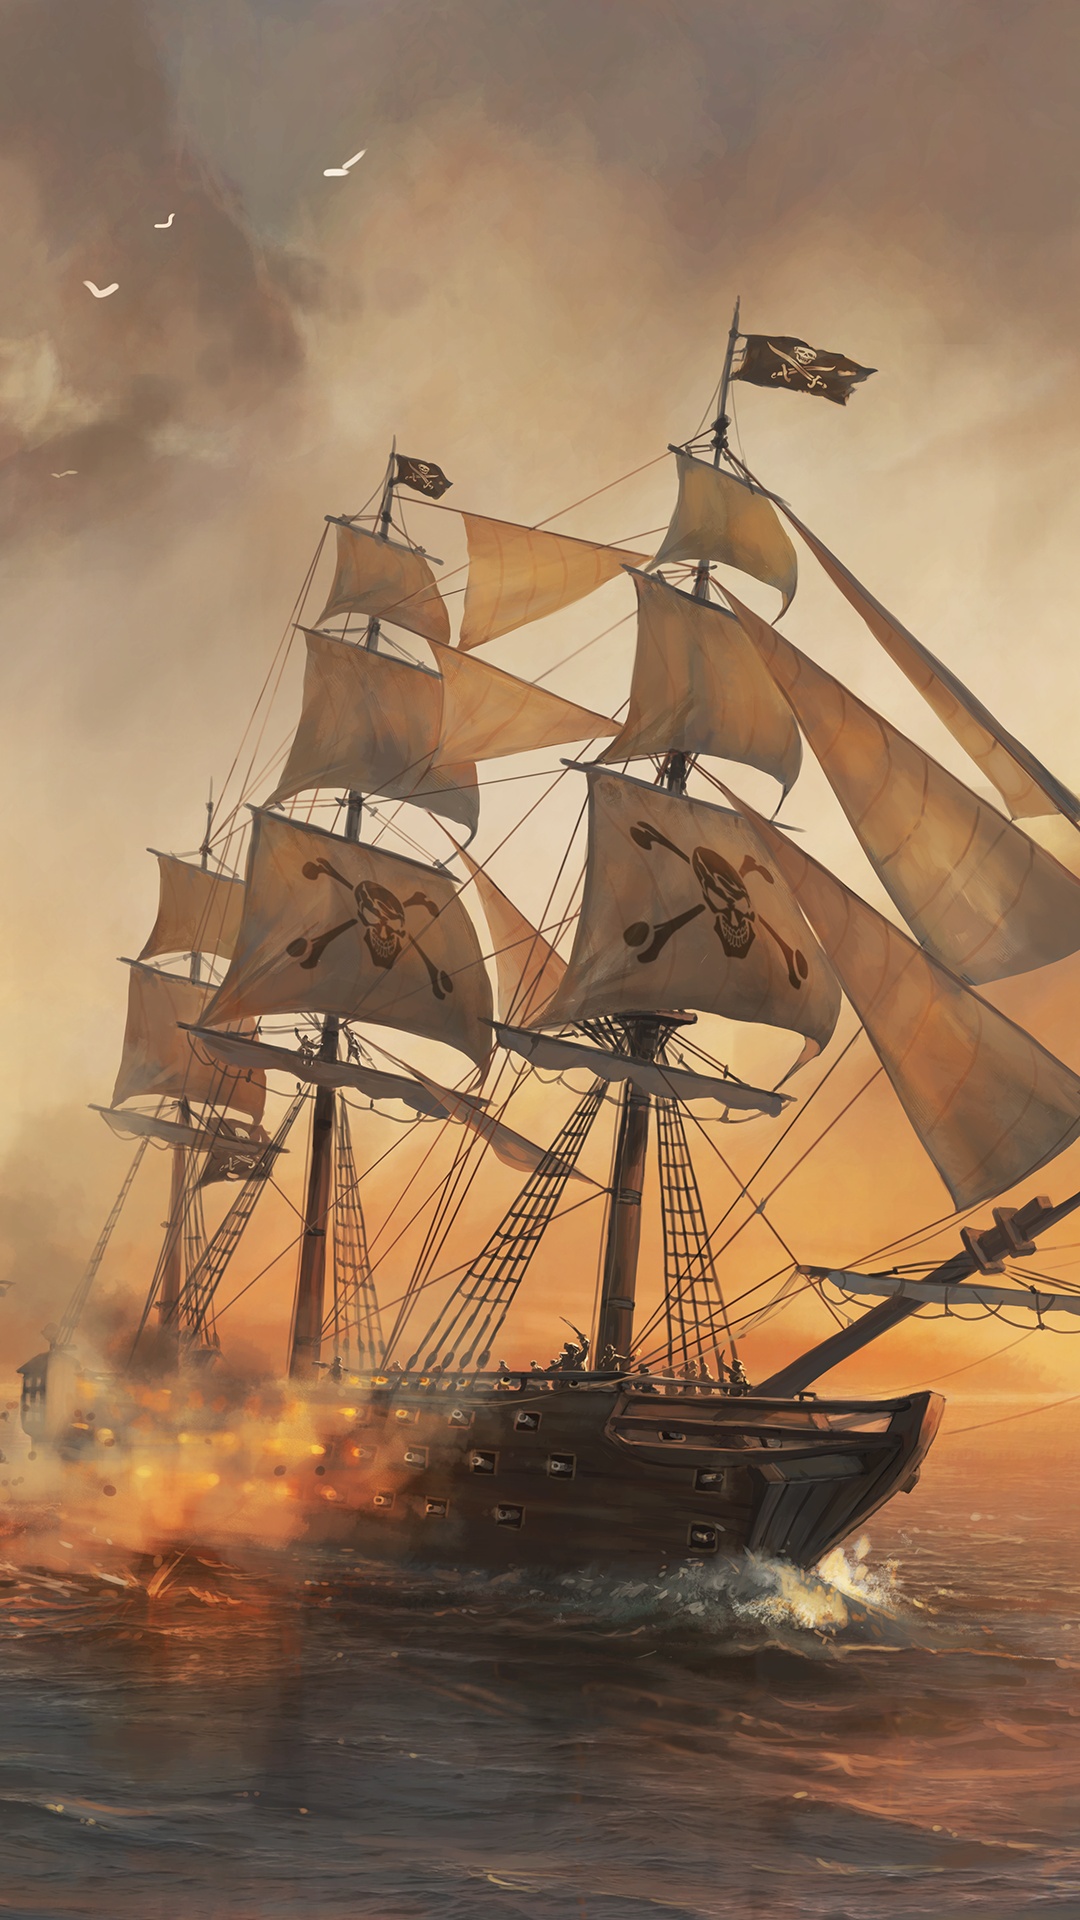 The Pirate: Caribbean Hunt wallpaper is